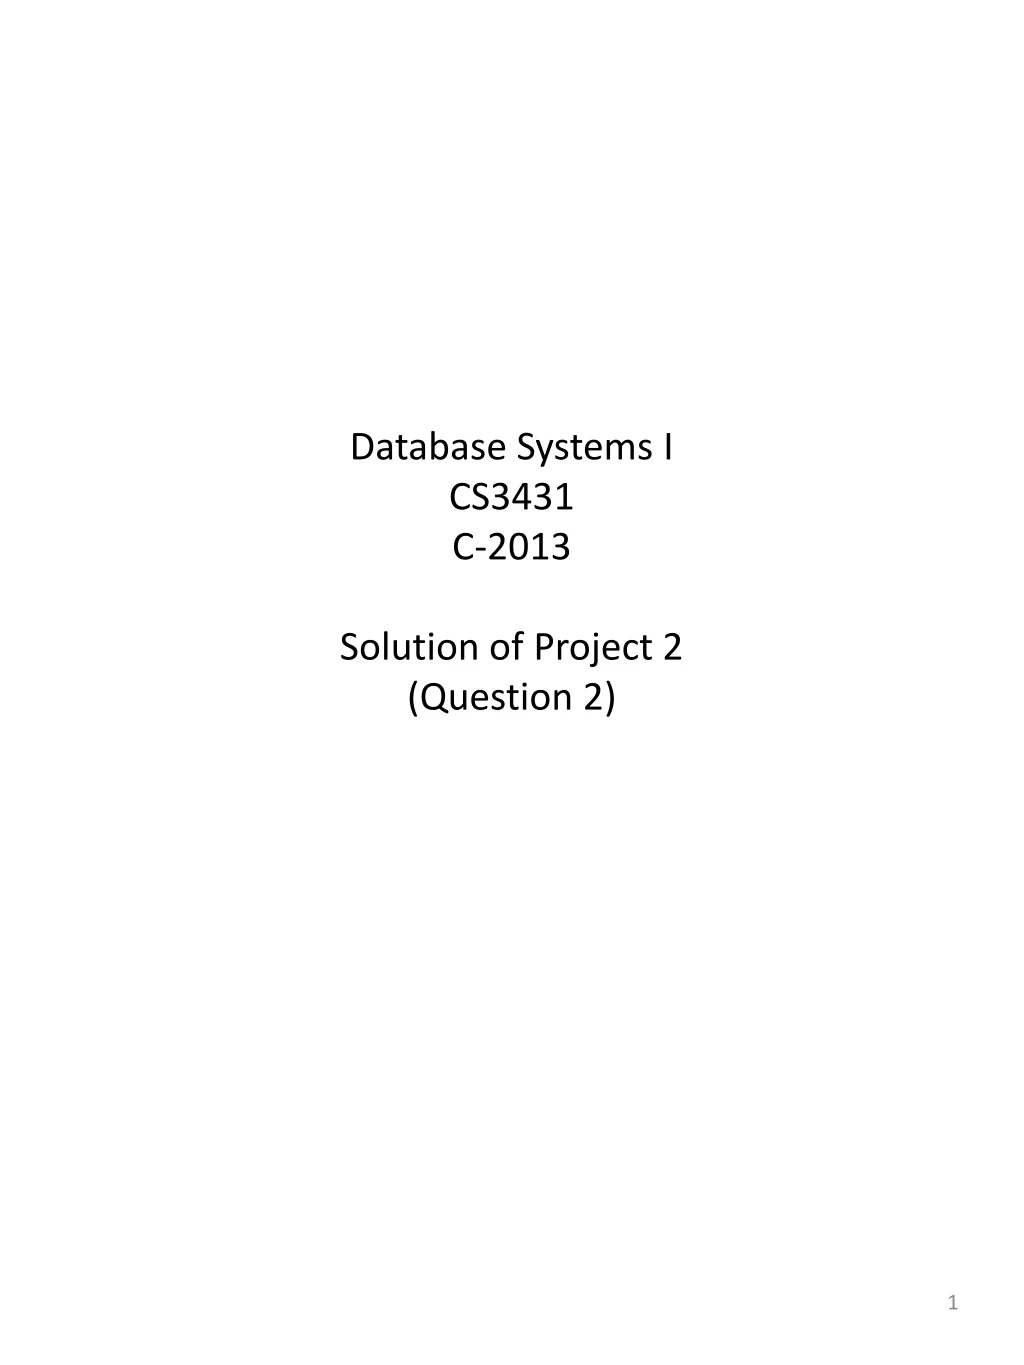 database systems i cs3431 c 2013 solution of project 2 question 2